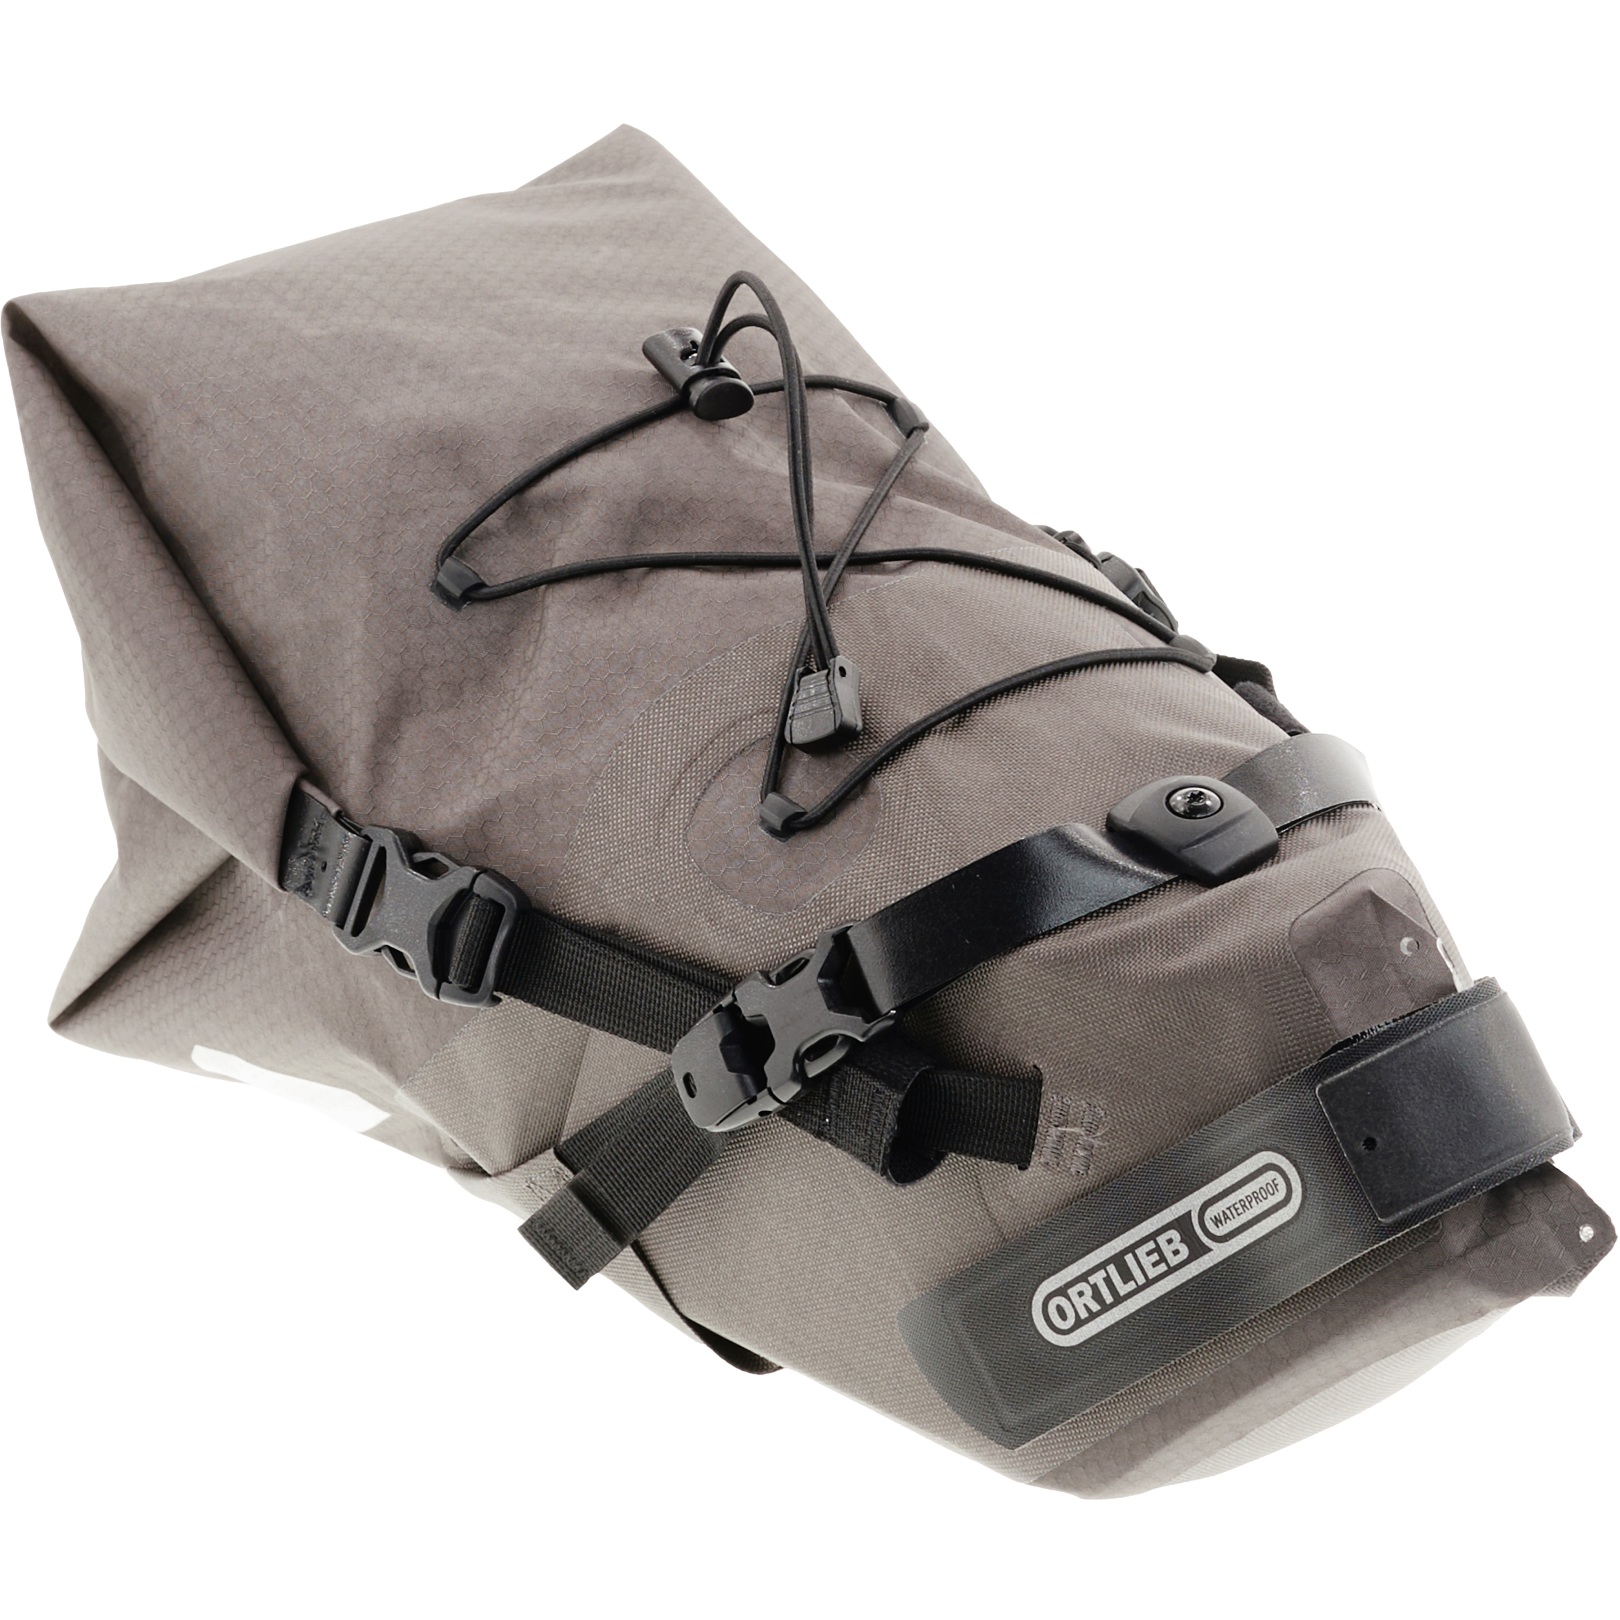 Picture of ORTLIEB Seat-Pack - 11L - dark sand